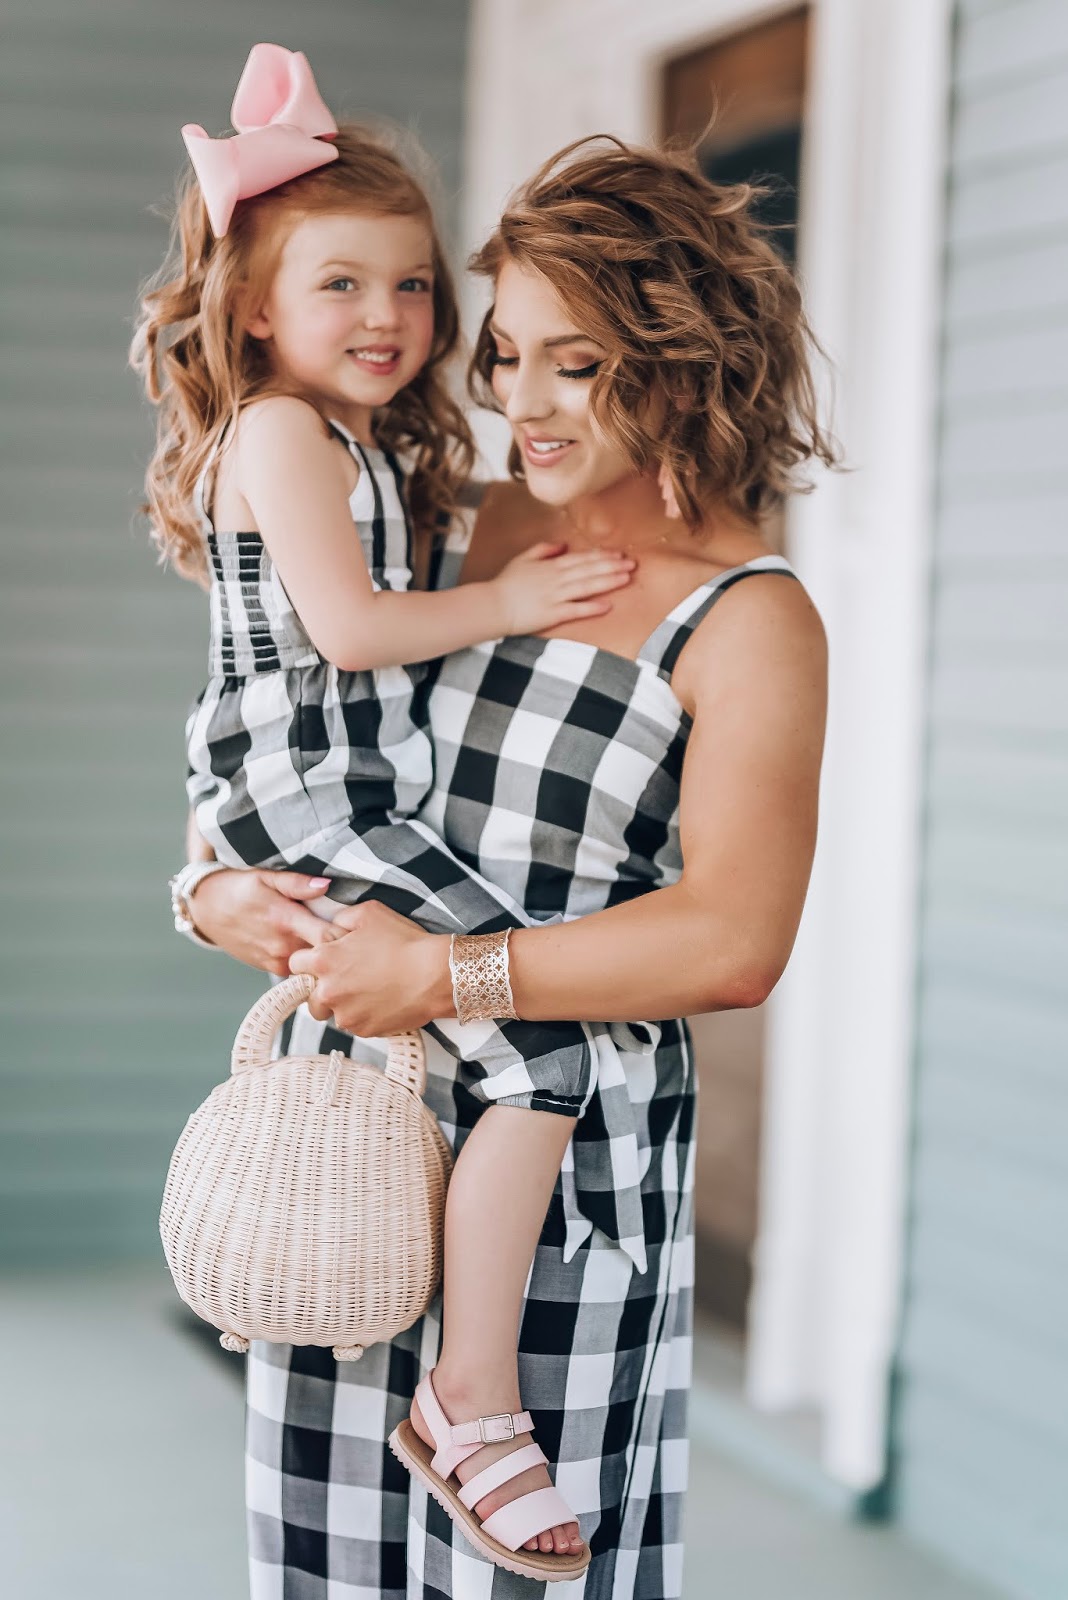 Mommy & Me Gingham Jumpsuits + What I Wish I Could Have Told Myself As a Young Mom - Something Delightful Blog